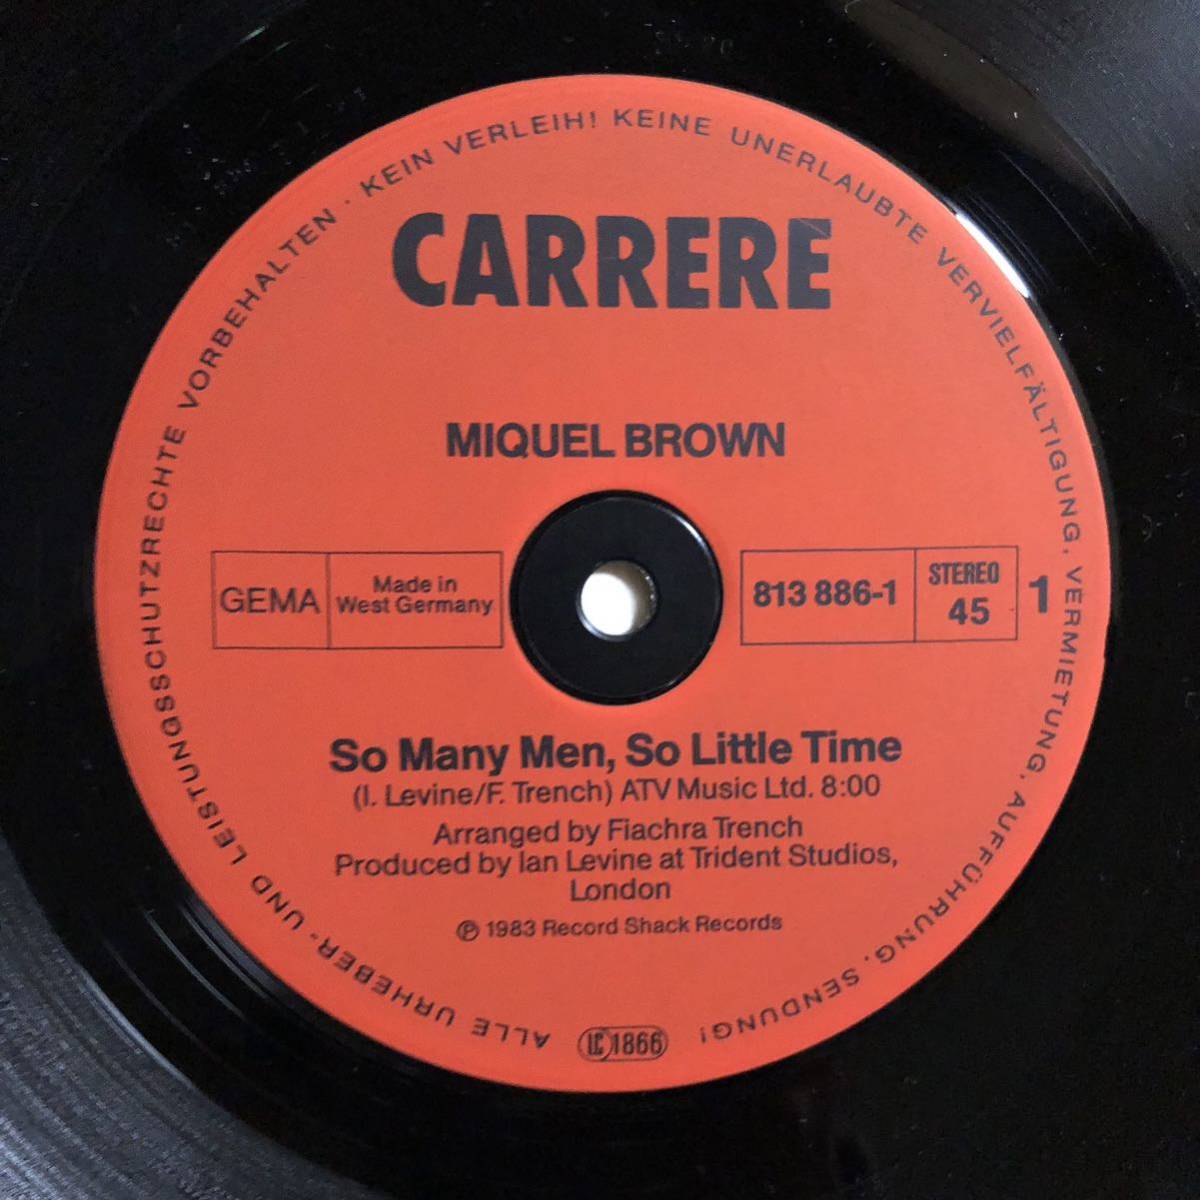 【80's】Miquel Brown / So Many Men So Little Time［12inch］オリジナル盤《O-115 95959》_画像4